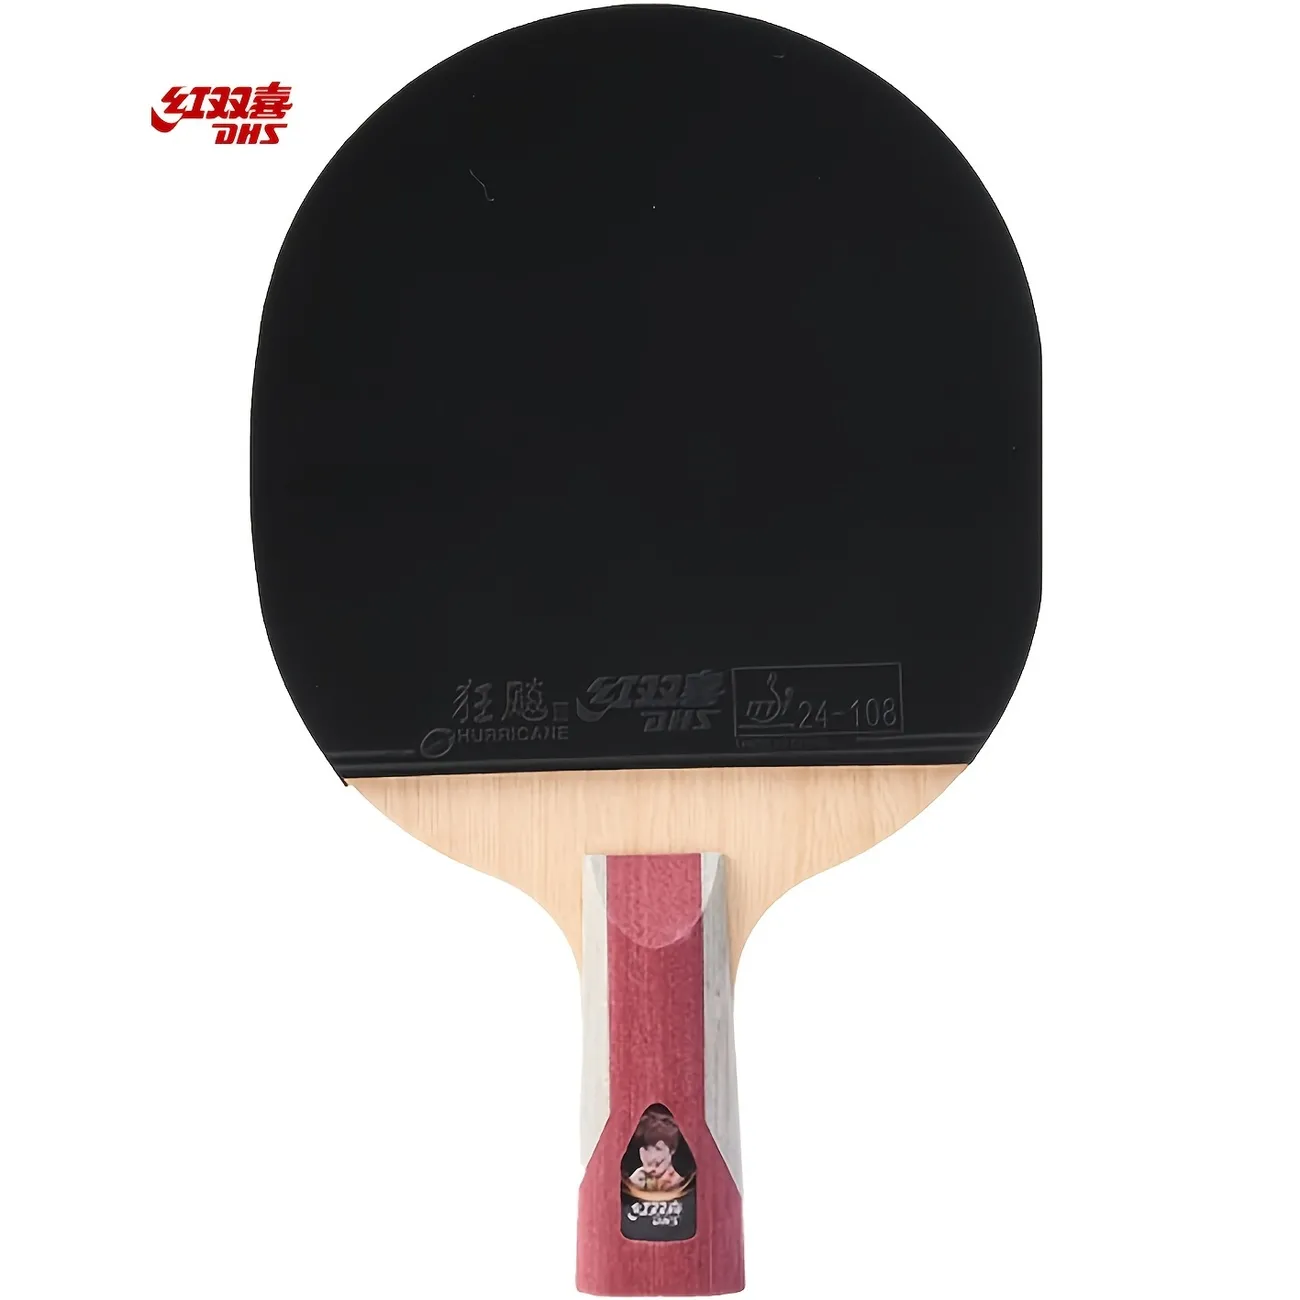 Upgrade Your Table Tennis Game With The Dhs Ping Pong Racquet - 6 Stars Double Sided Reverse Rubber H6006